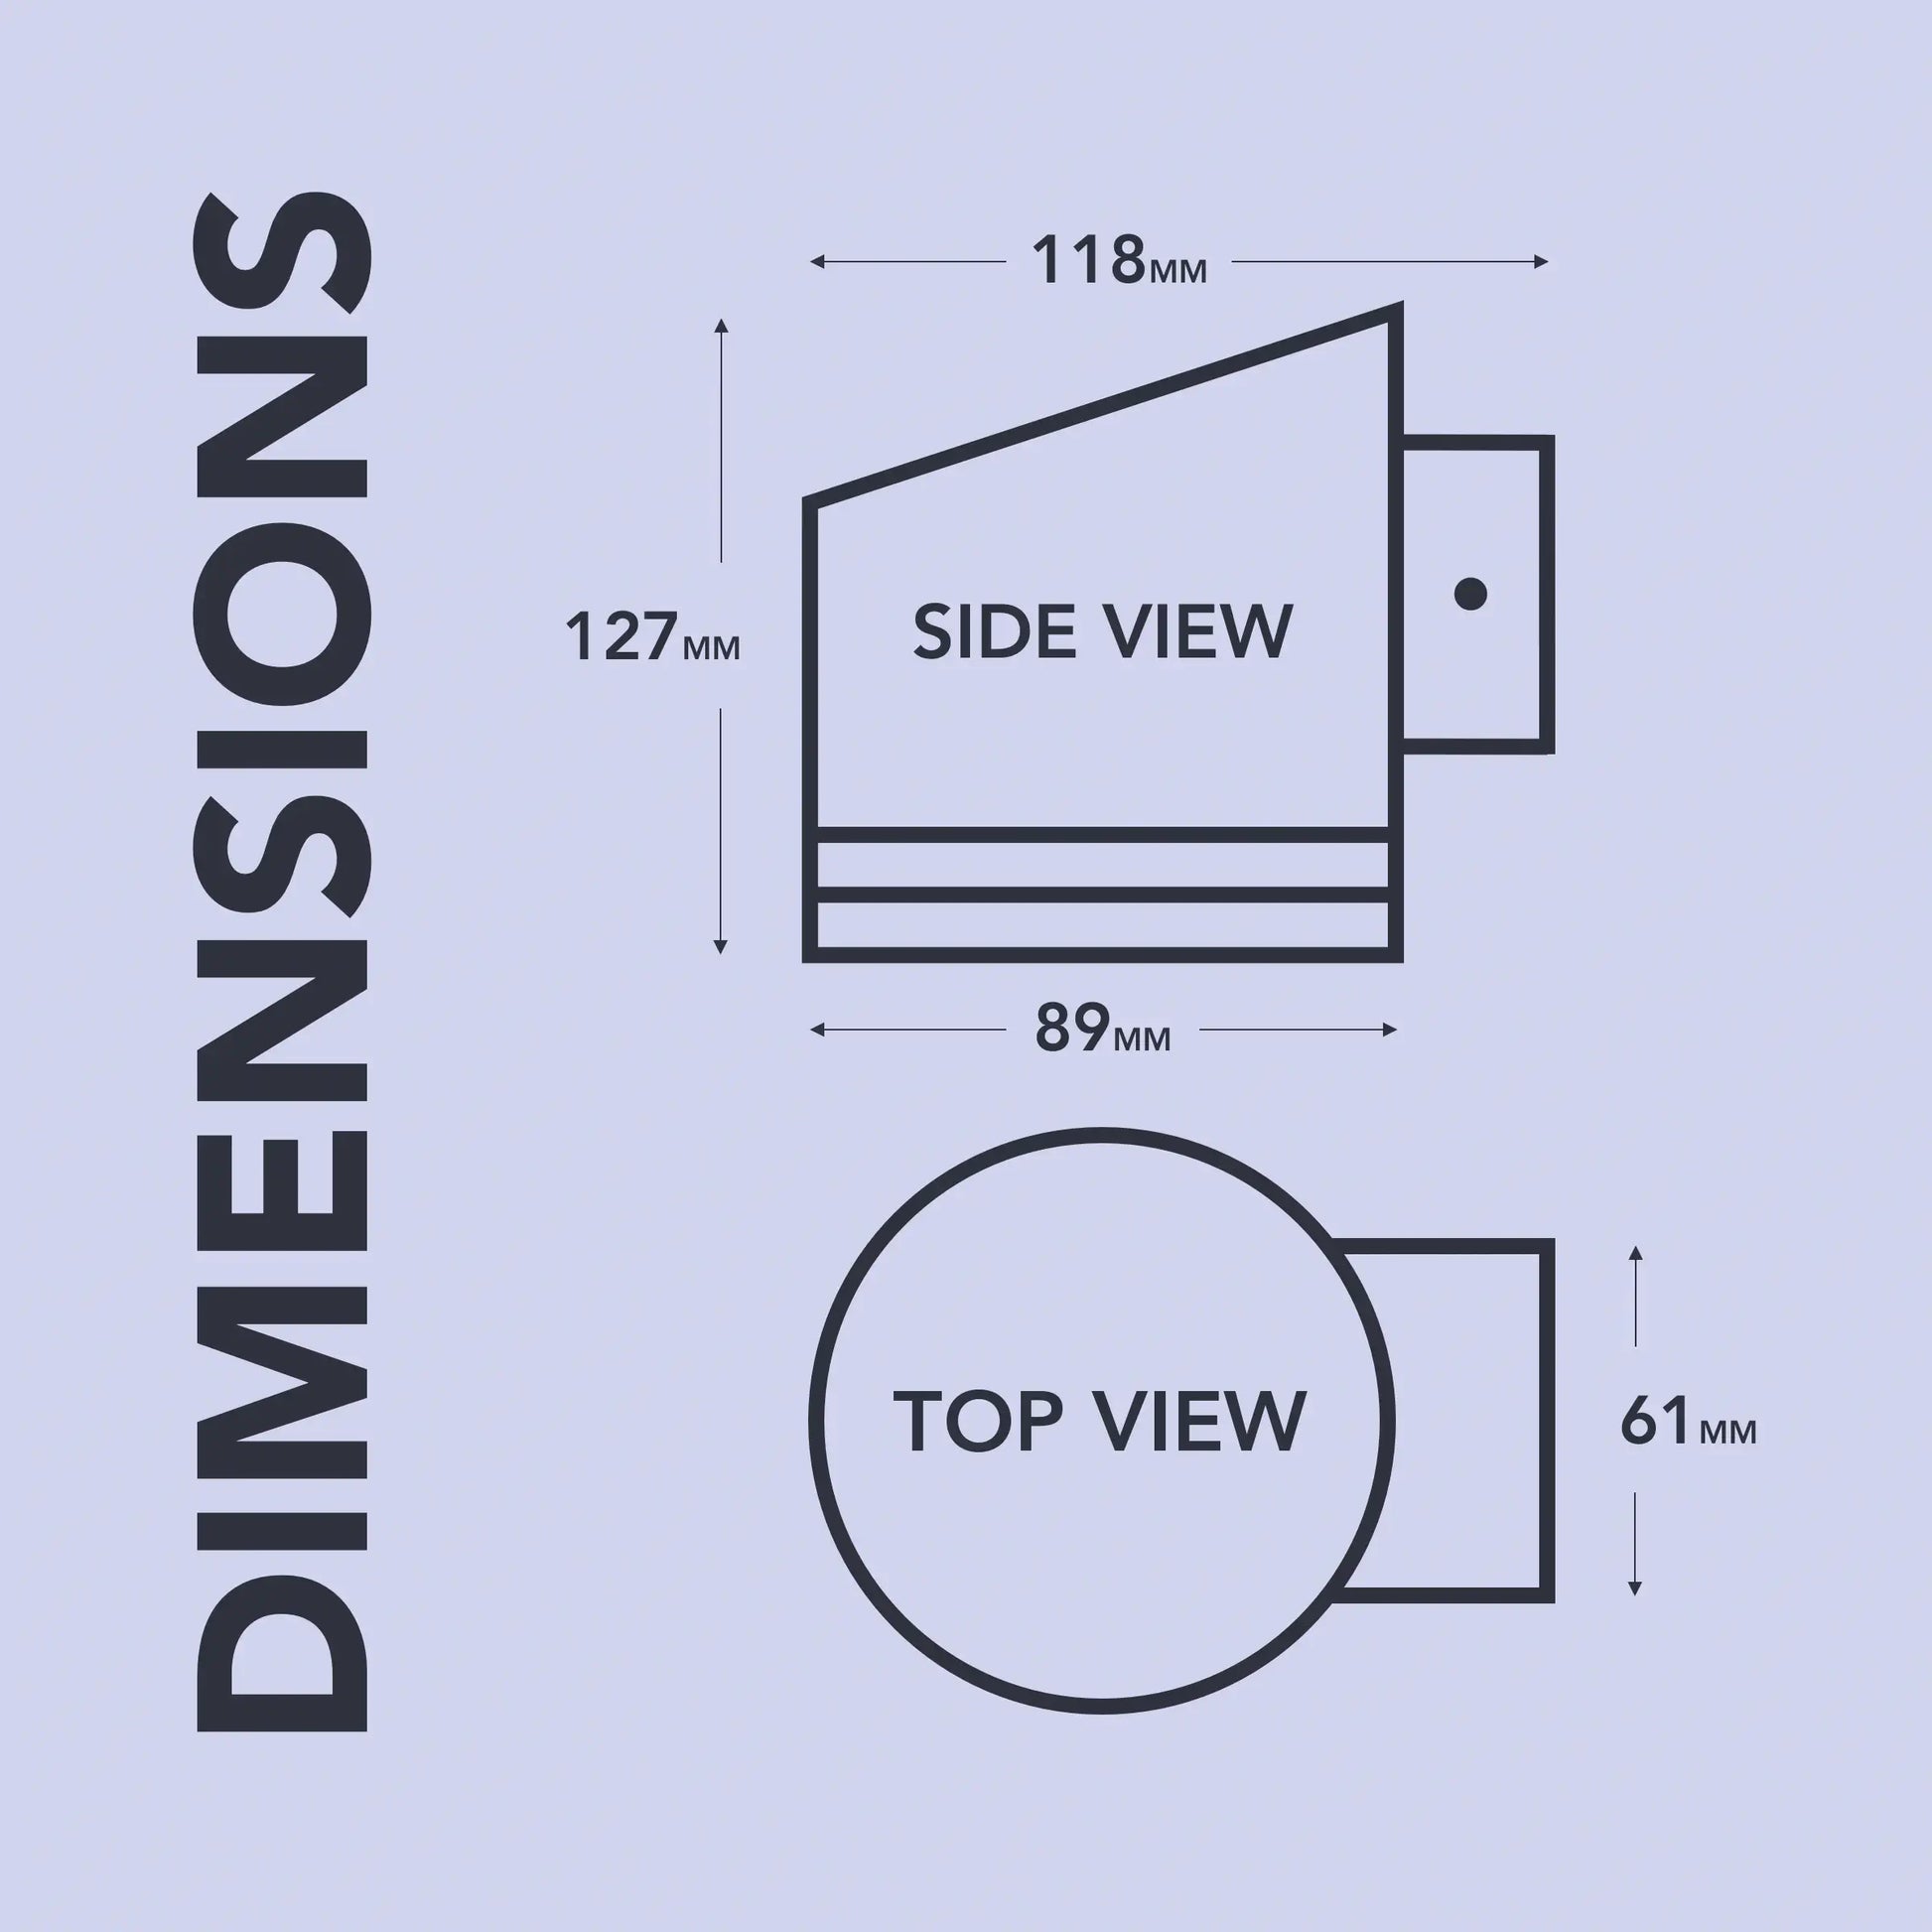 A technical drawing showing the dimensions of a solar-powered outdoor wall light. The drawing includes two views: a side view and a top view. The side view indicates a height of 127 mm, a width of 89 mm, and a depth of 118 mm. The top view shows a circular design with a diameter of 61 mm for the base and 89 mm for the top section. The word "DIMENSIONS" is vertically written on the left side of the image.